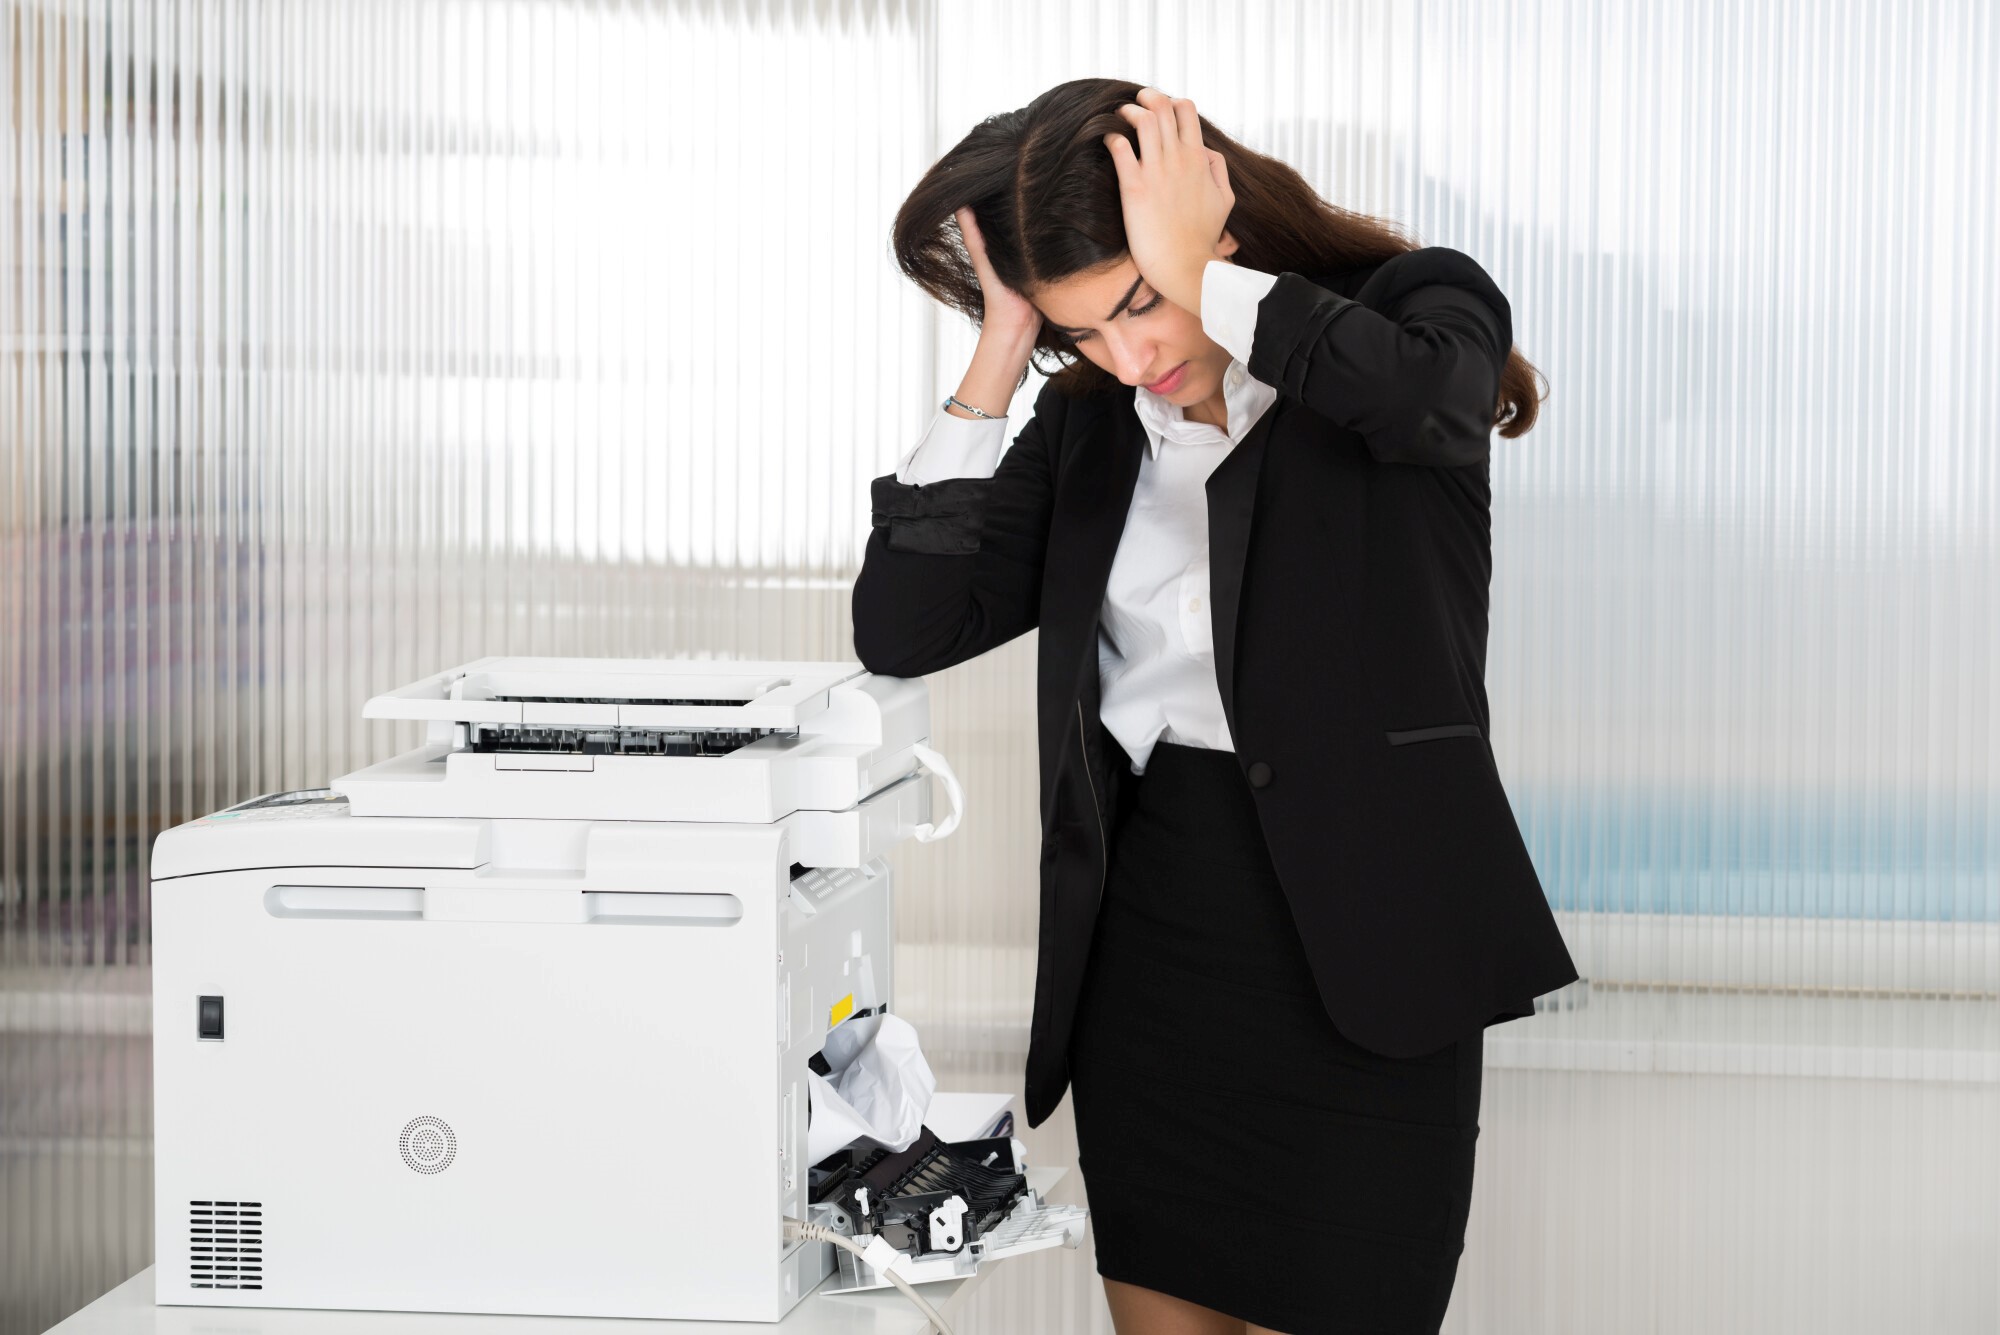 10 Common Printer Problems and How to Solve Them